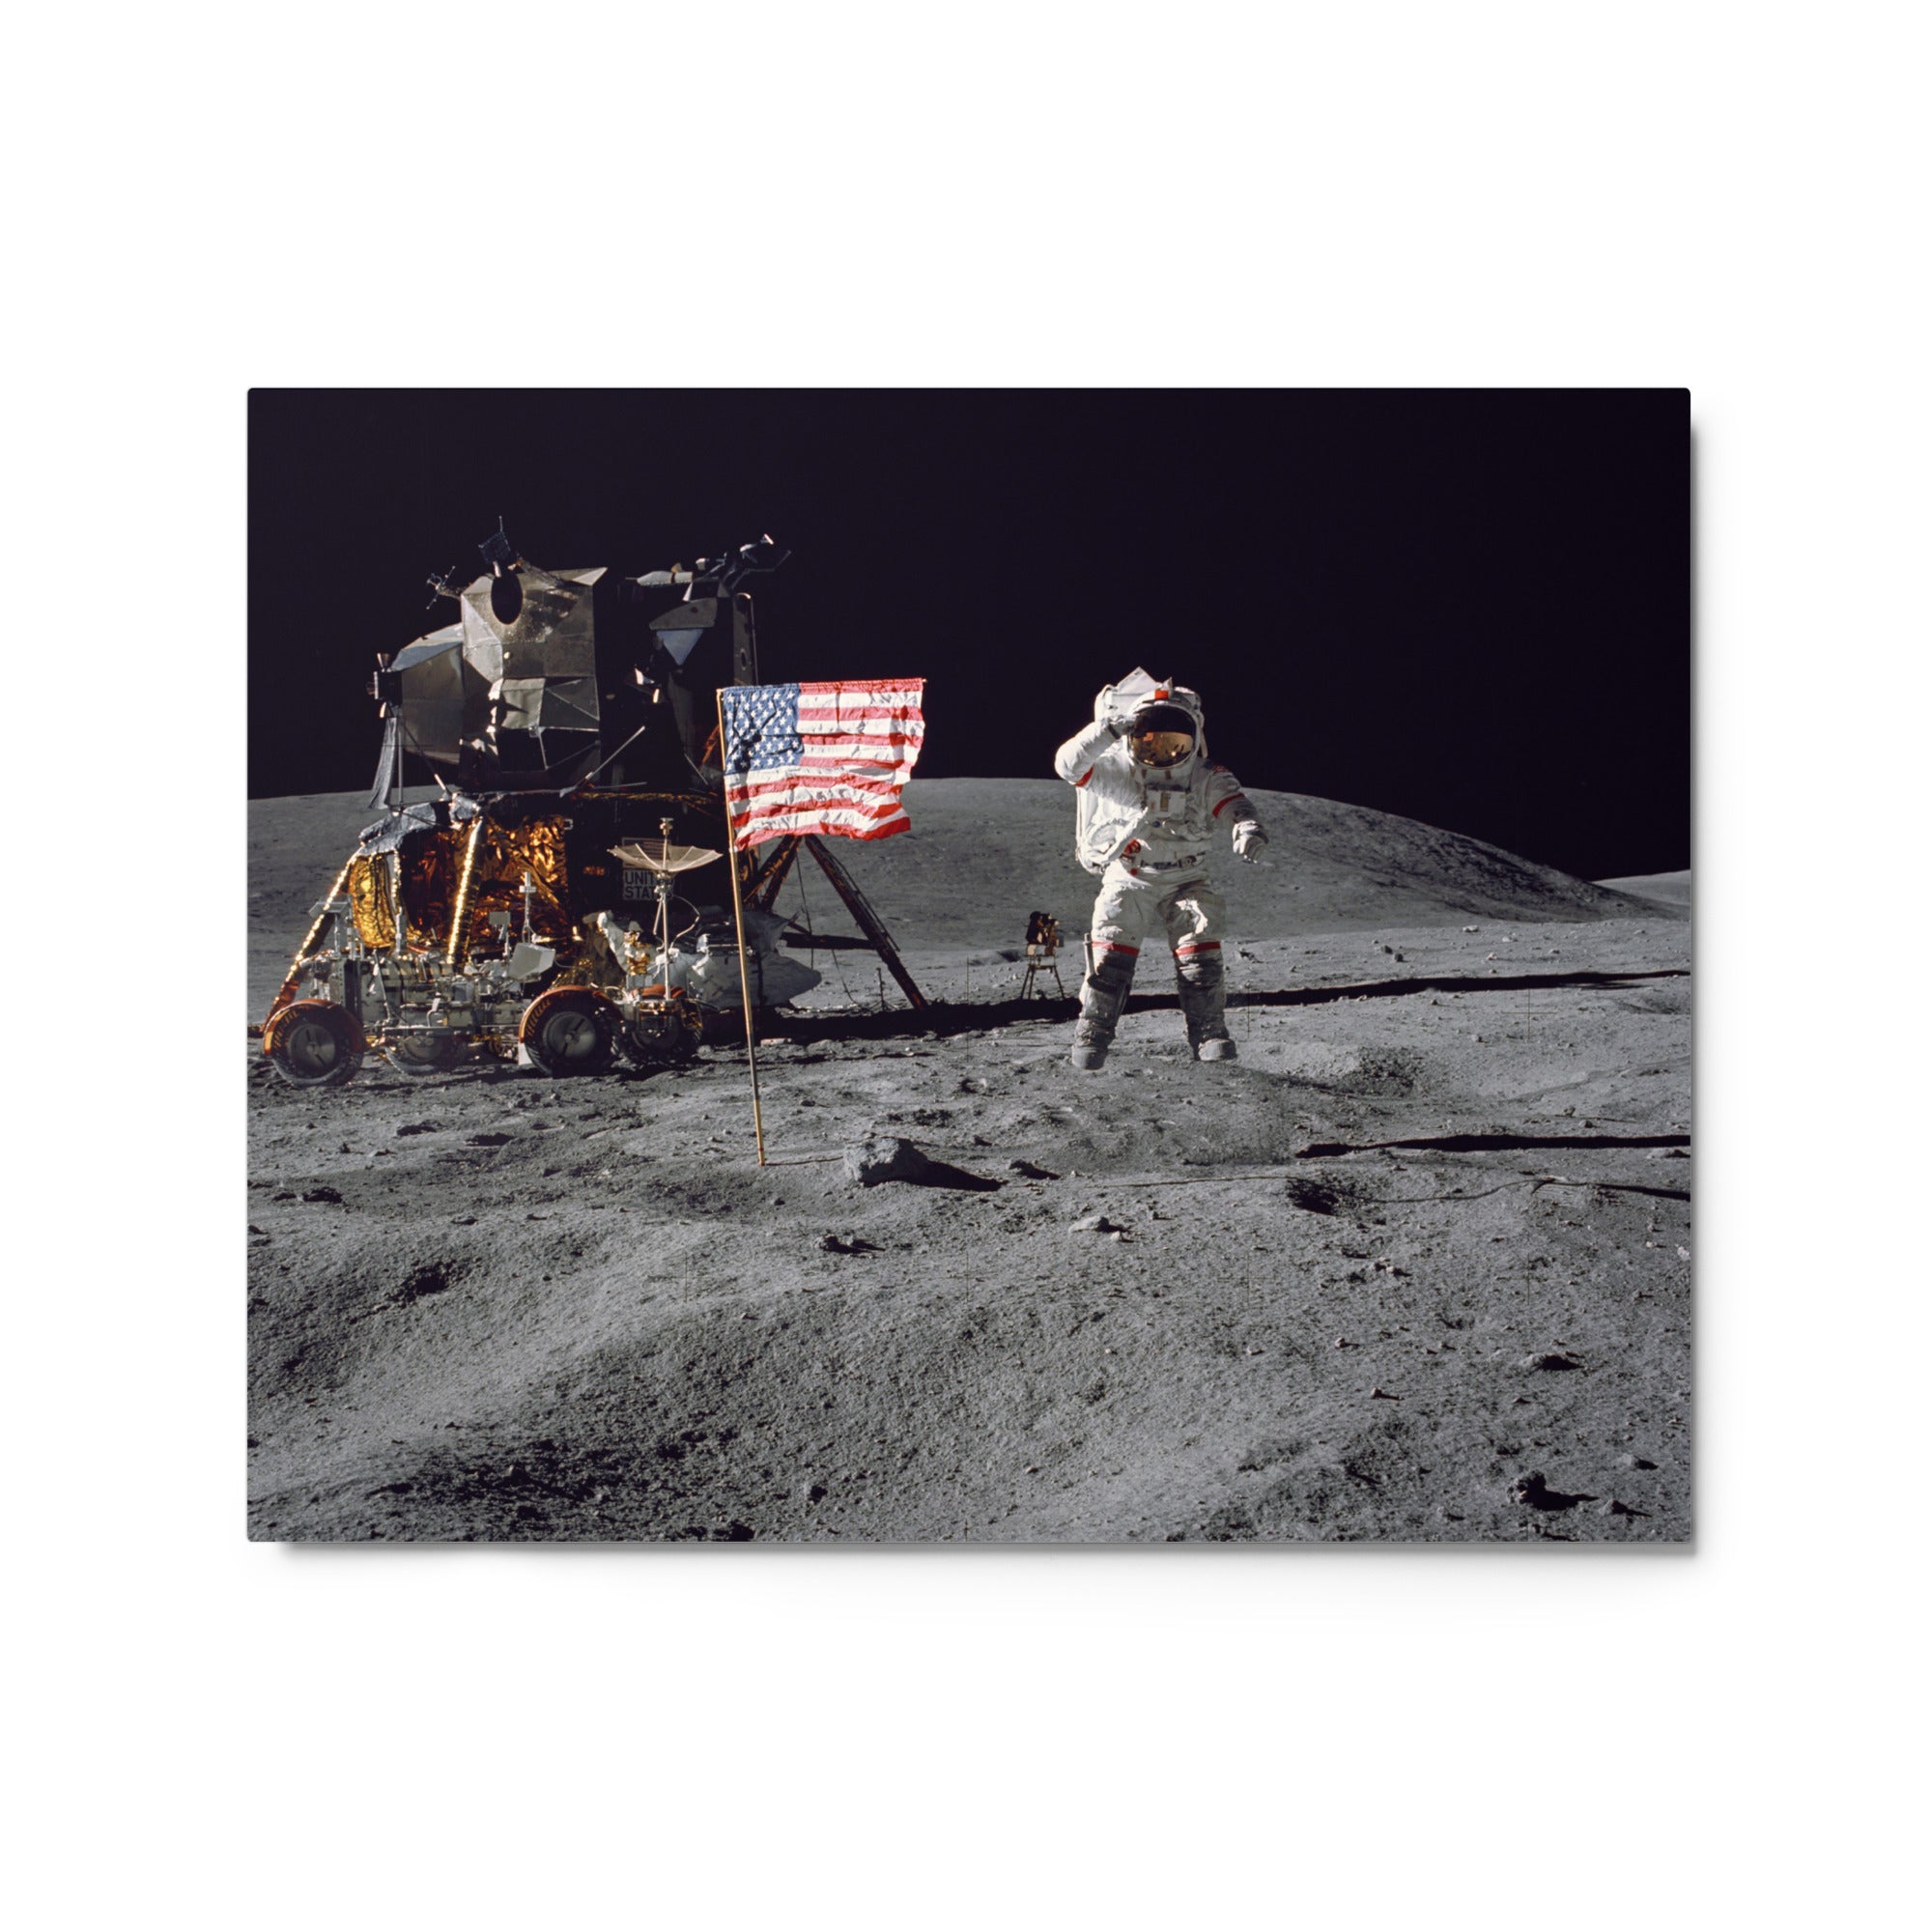 Metal Print: High-Quality John W. Young's Lunar Salute  - Expertly Crafted